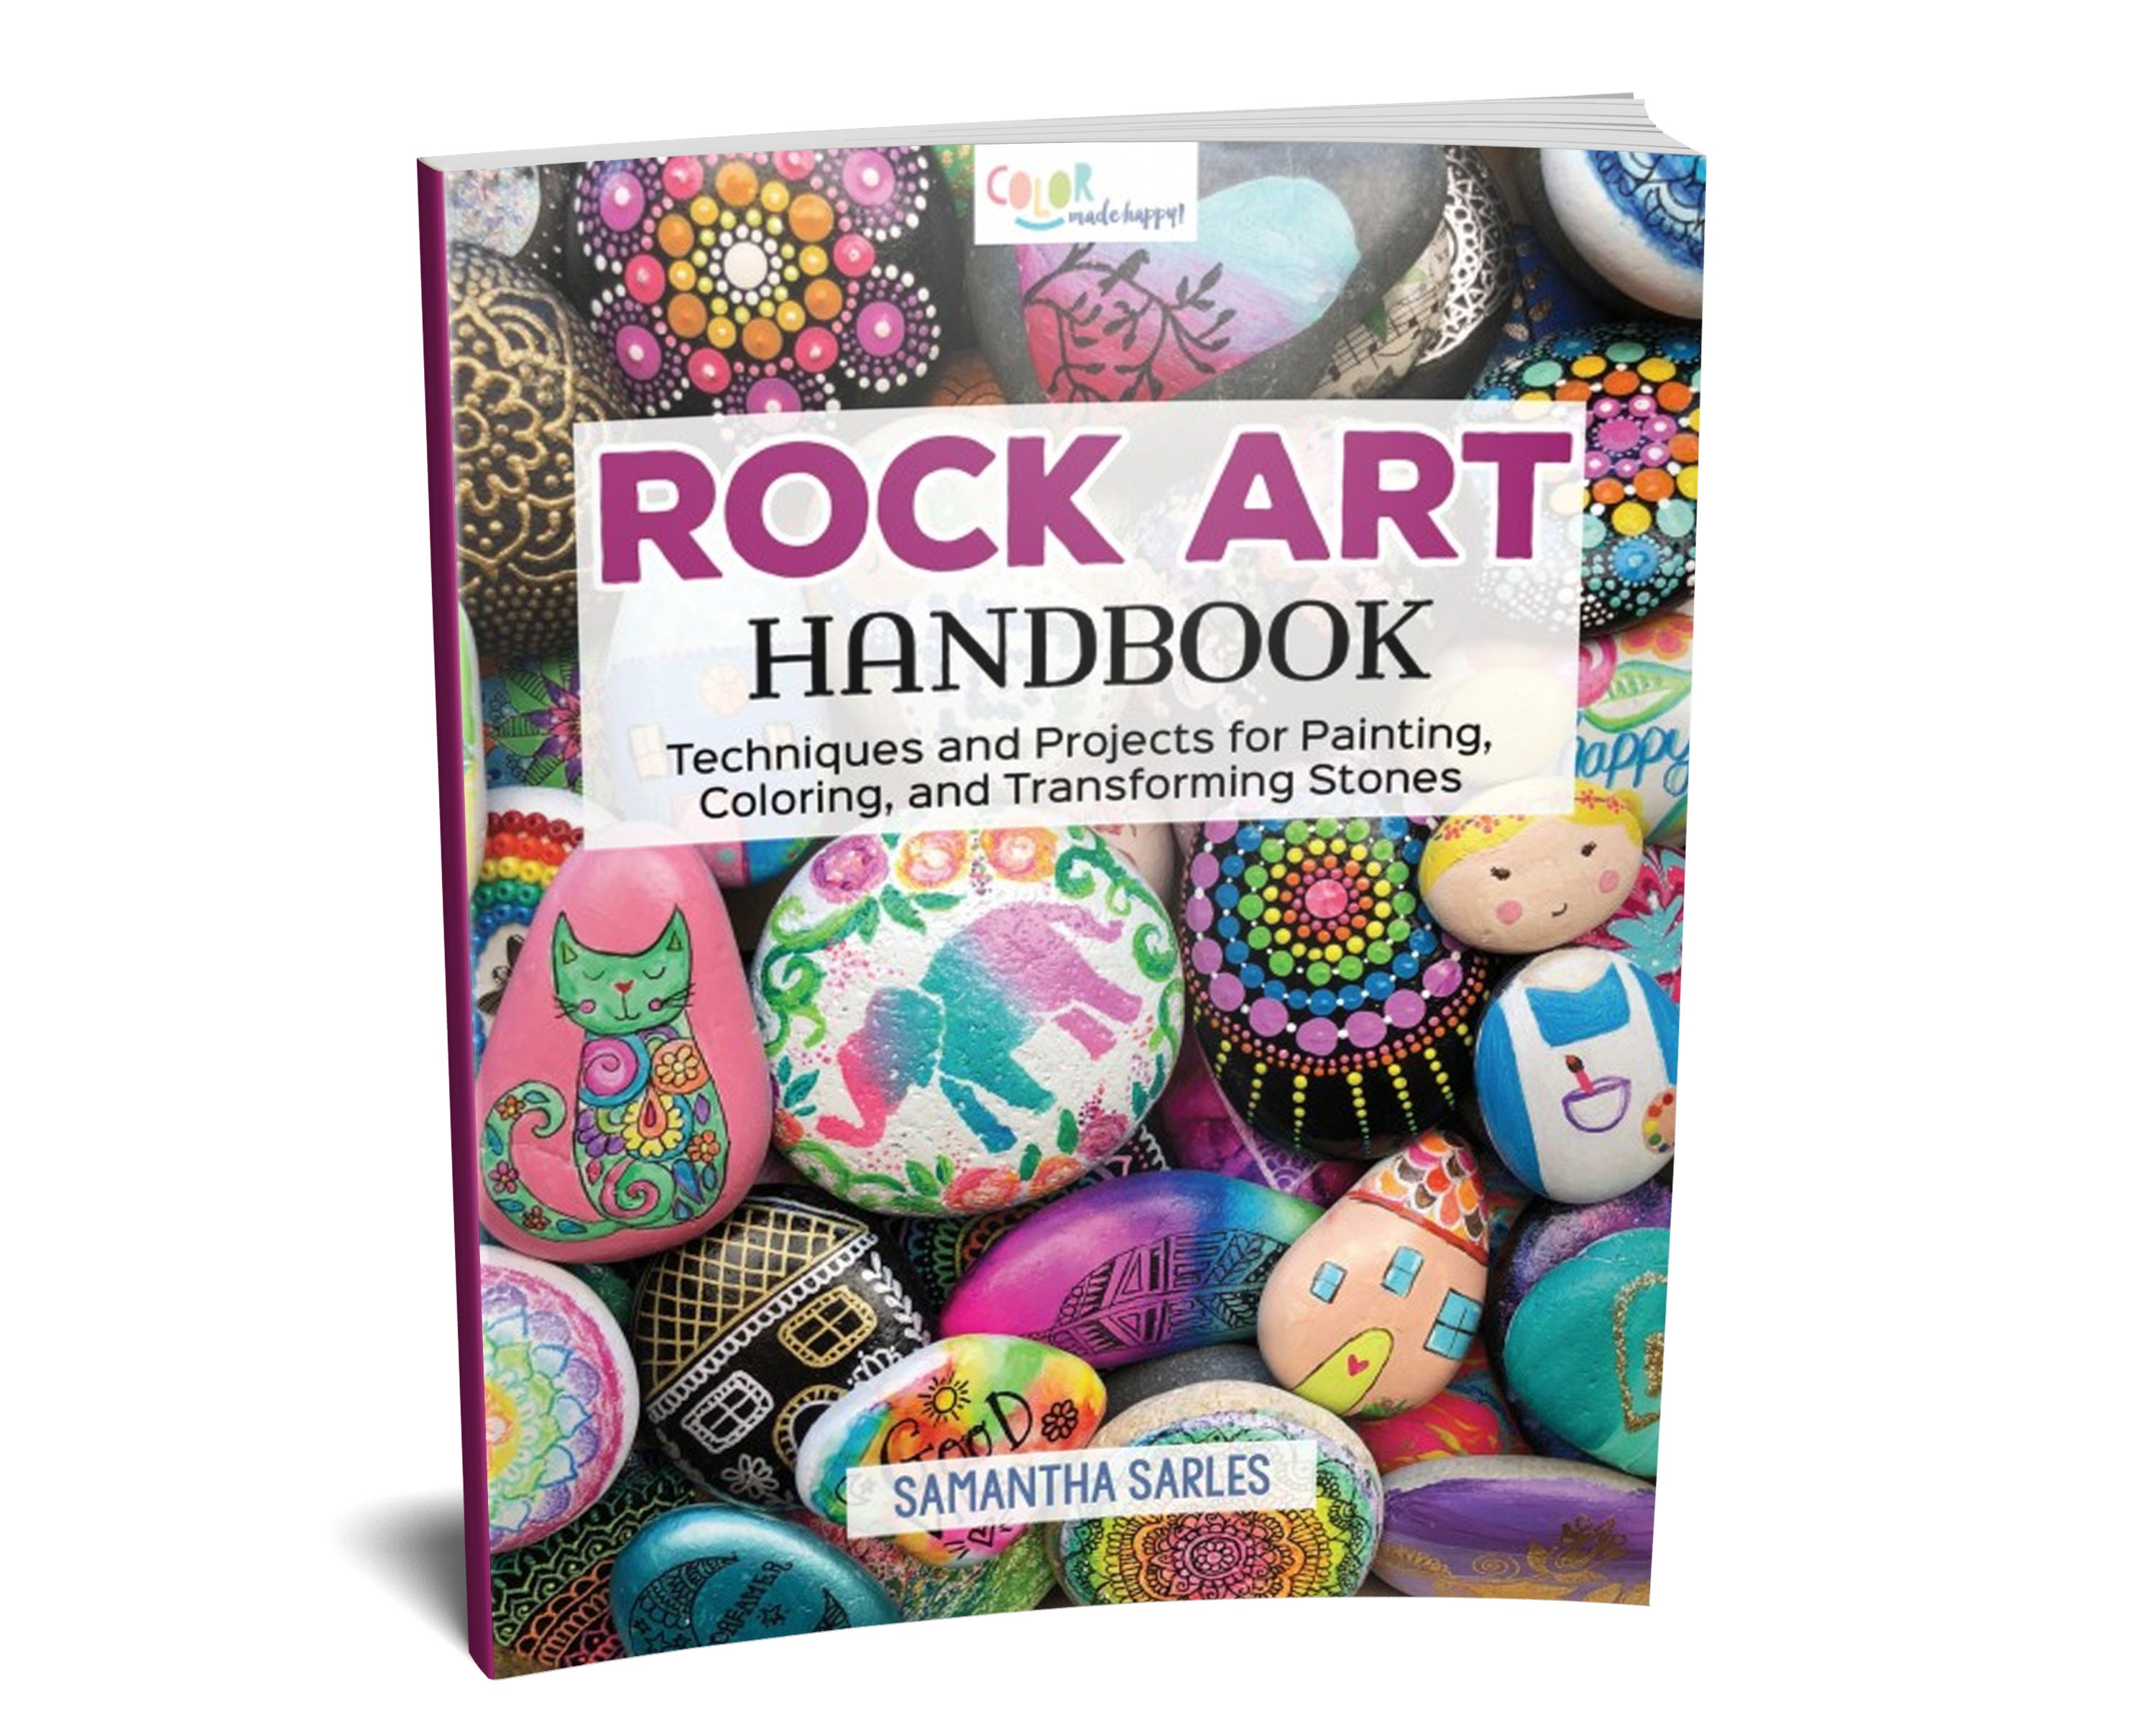  SpiceBox Rock Painting Kit For Adults And Teens, DIY Arts  And Crafts Creative Activities, Make Your Own Painted Rocks, Multi Colors